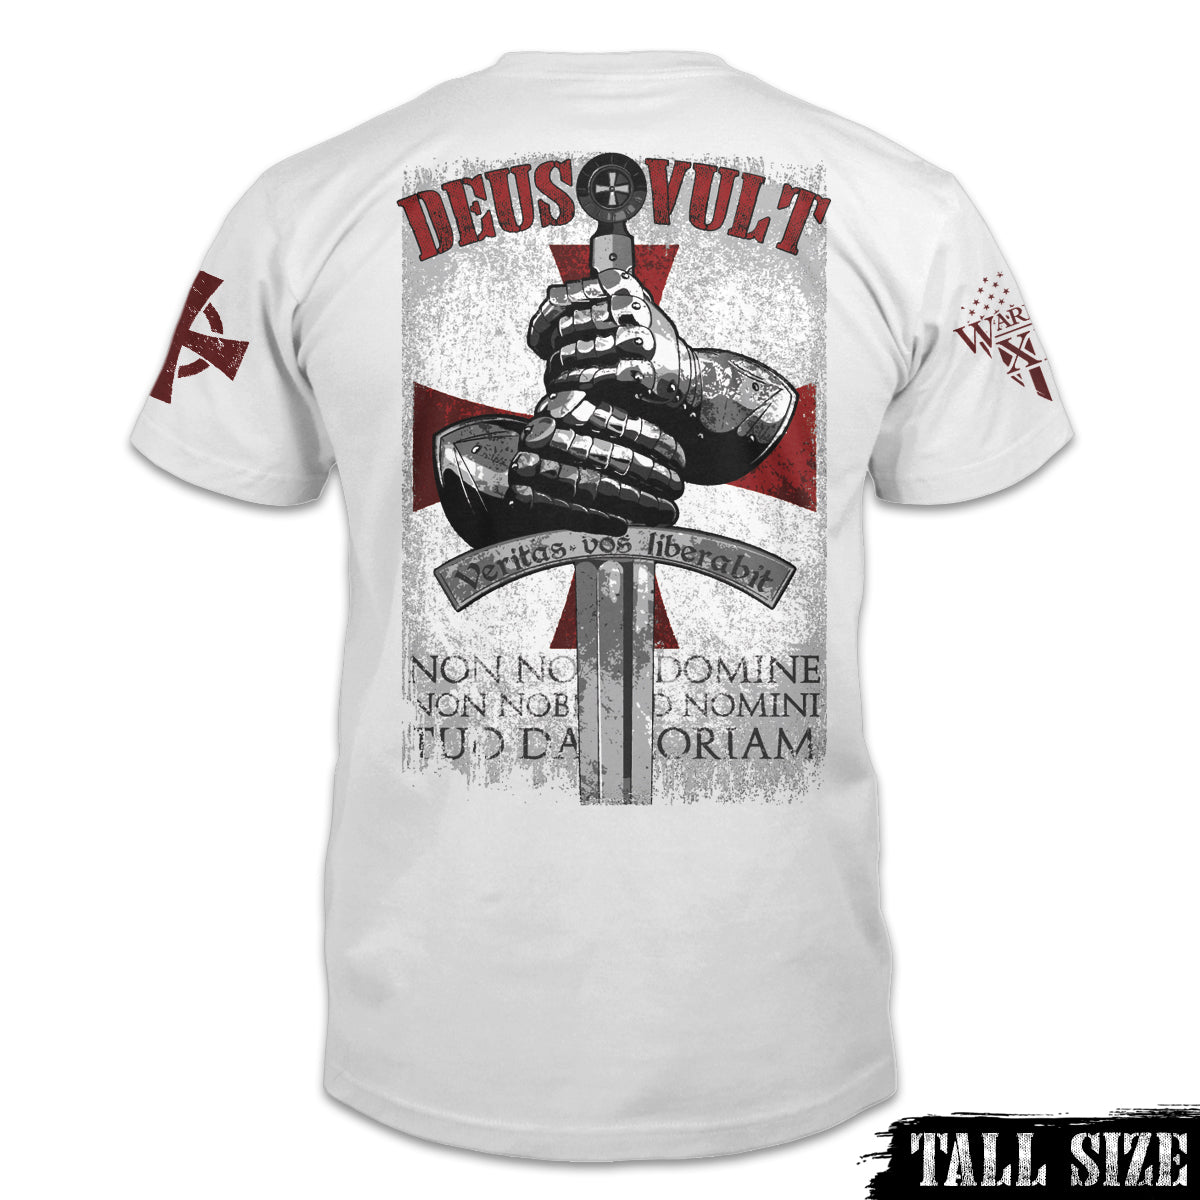 A white tall sized shirt with a design that is an iconic representation of the crusaders that invokes the spirit of the warriors of Christ. The design of the hands around the sword is printed on the back.